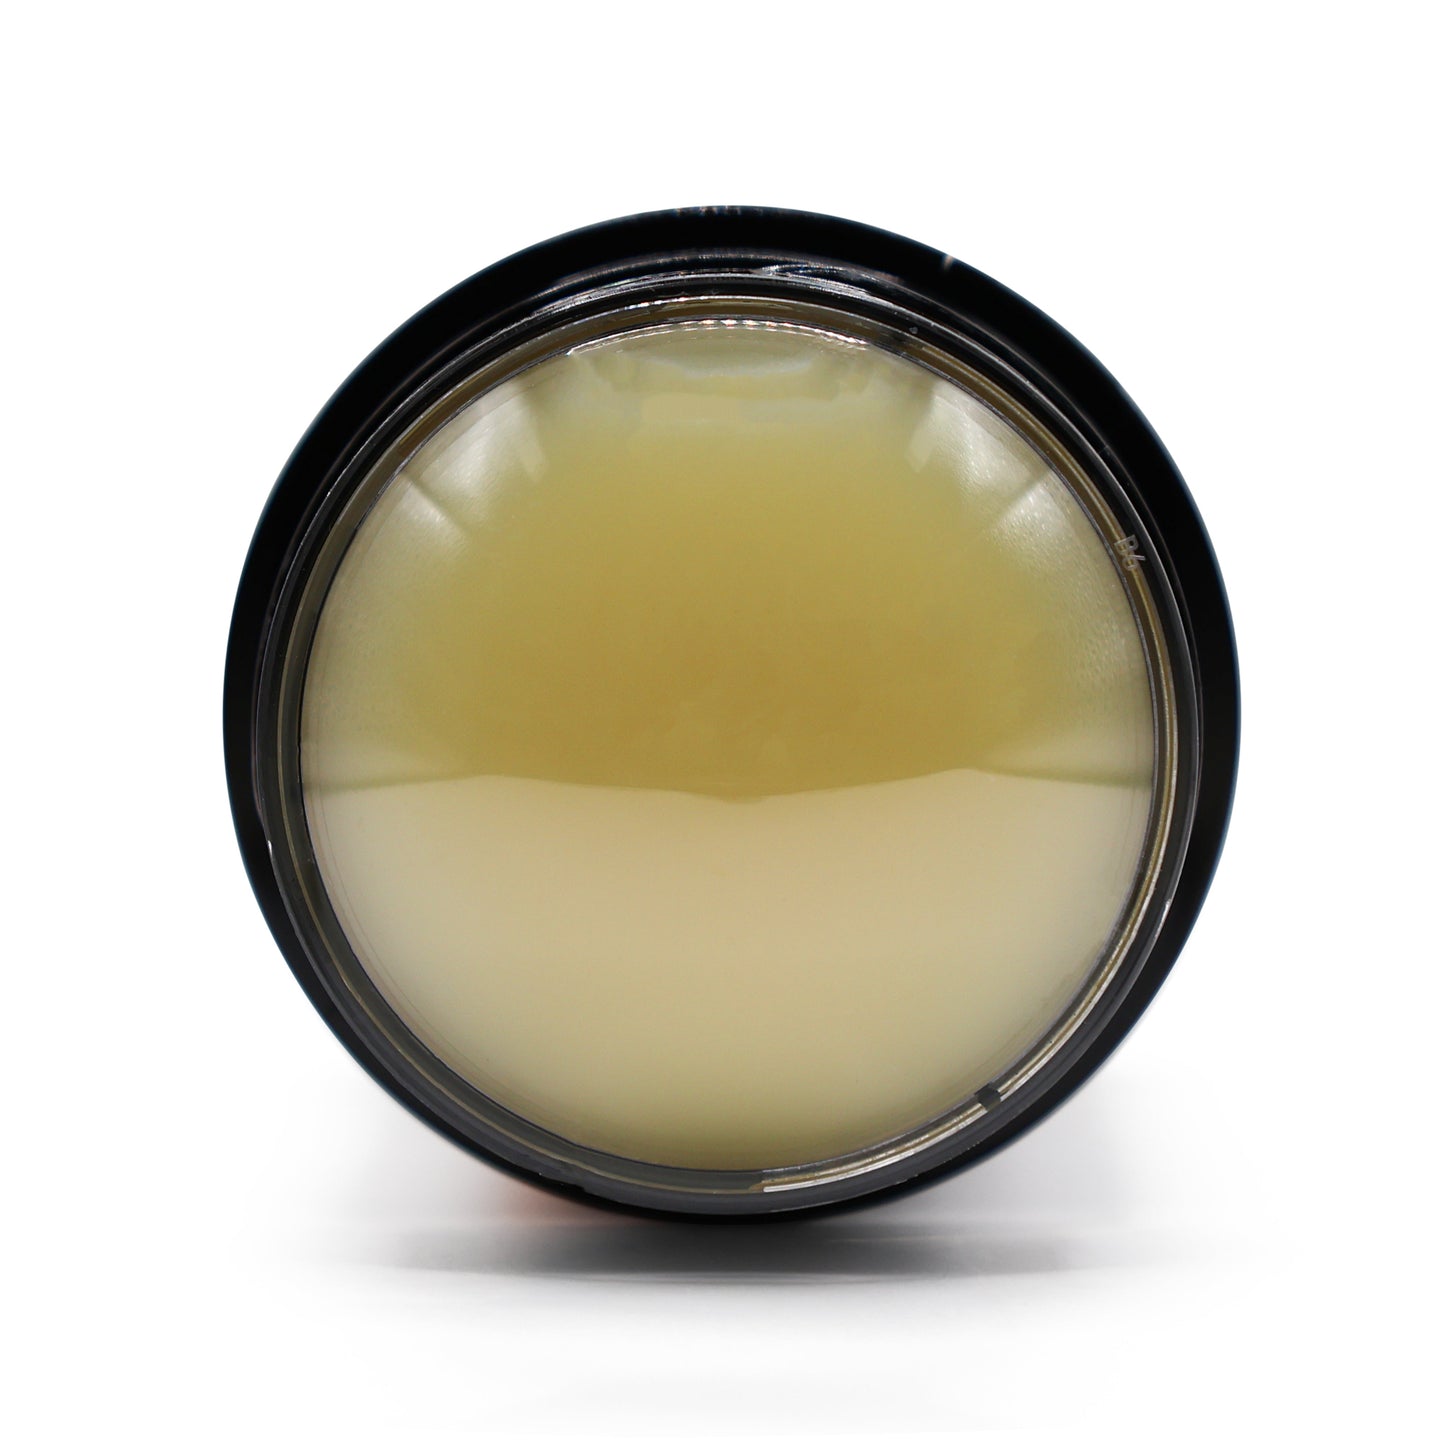 Skin Rescue Balm - Soothing Original (Unscented)